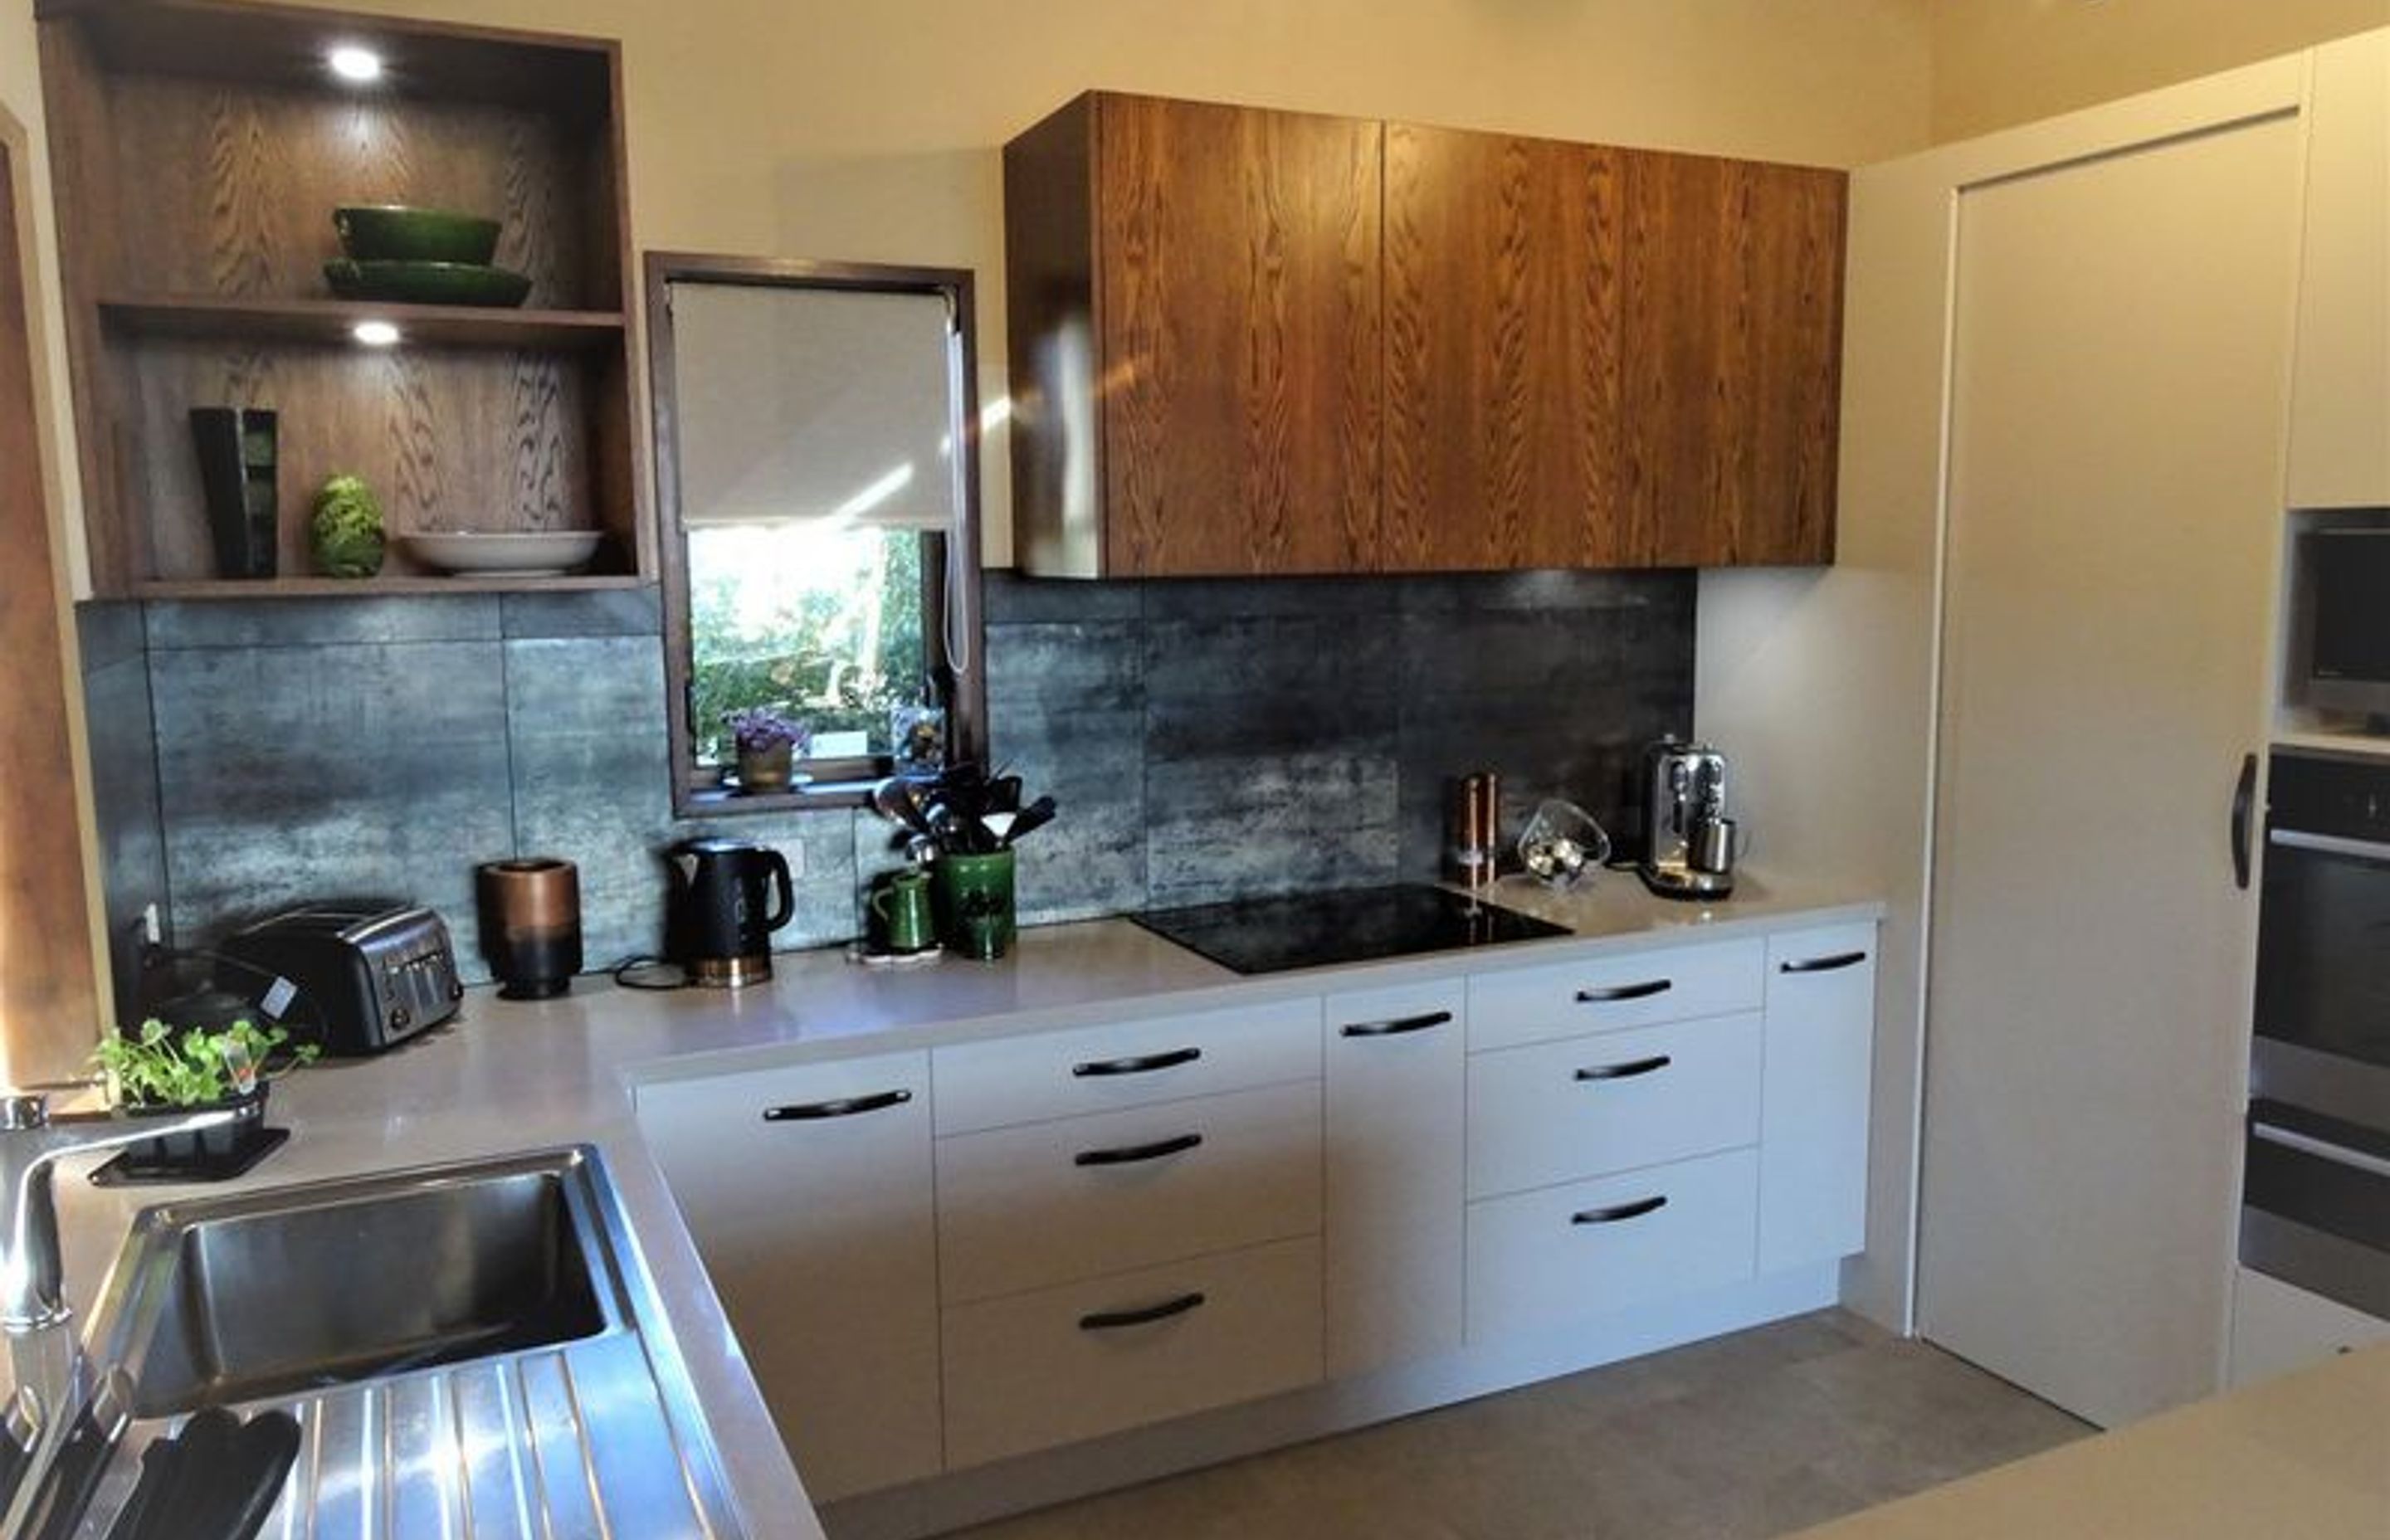 Different style drawers adding interest and storage to this kitchen design in Dunedin